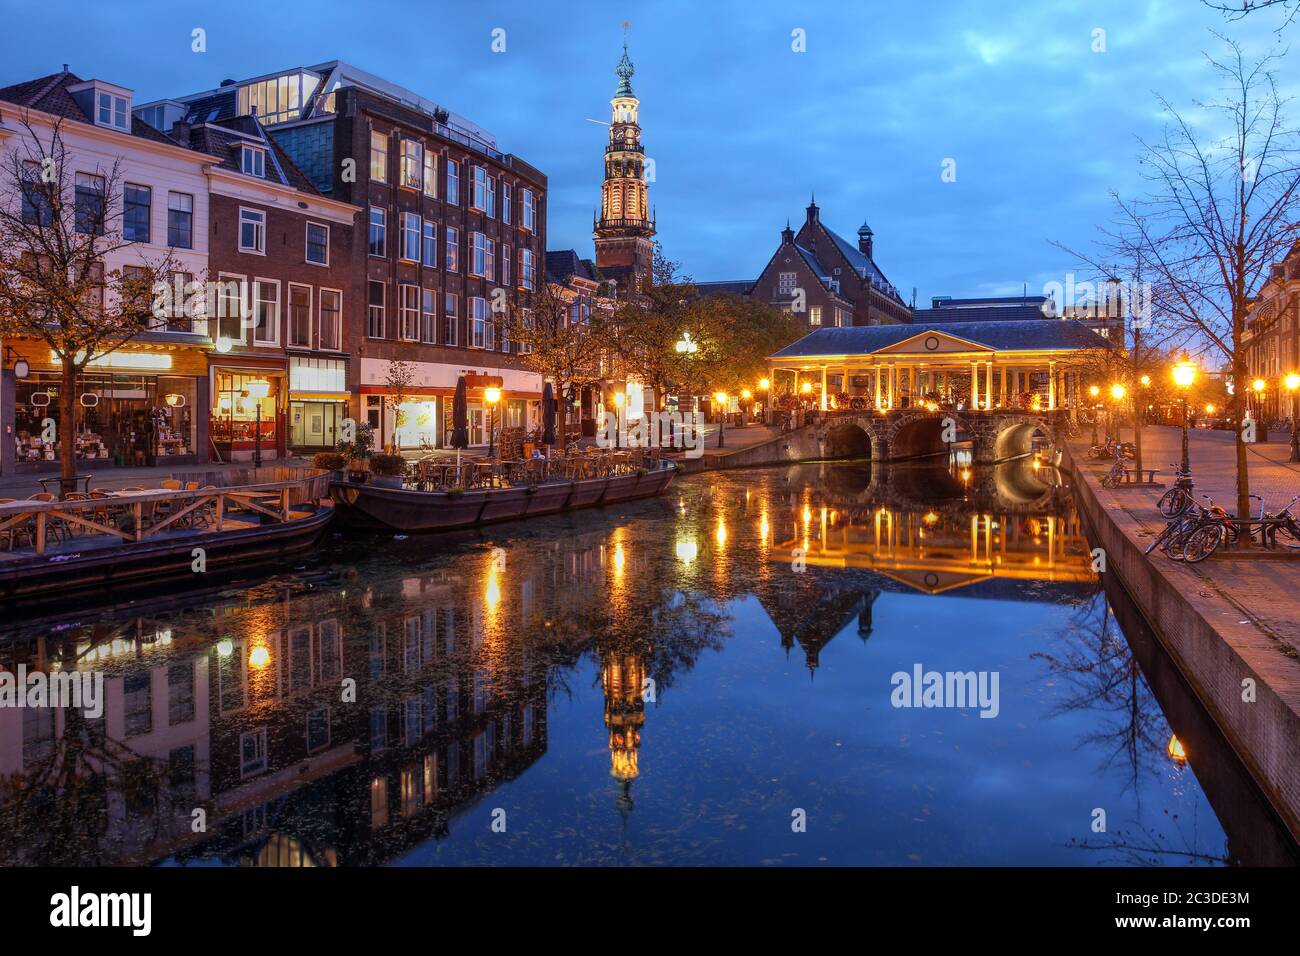 Night scene in Leiden, The Netherlands with the Korenbeursbrug bridge and the City Hall (Stadhuis). Stock Photo